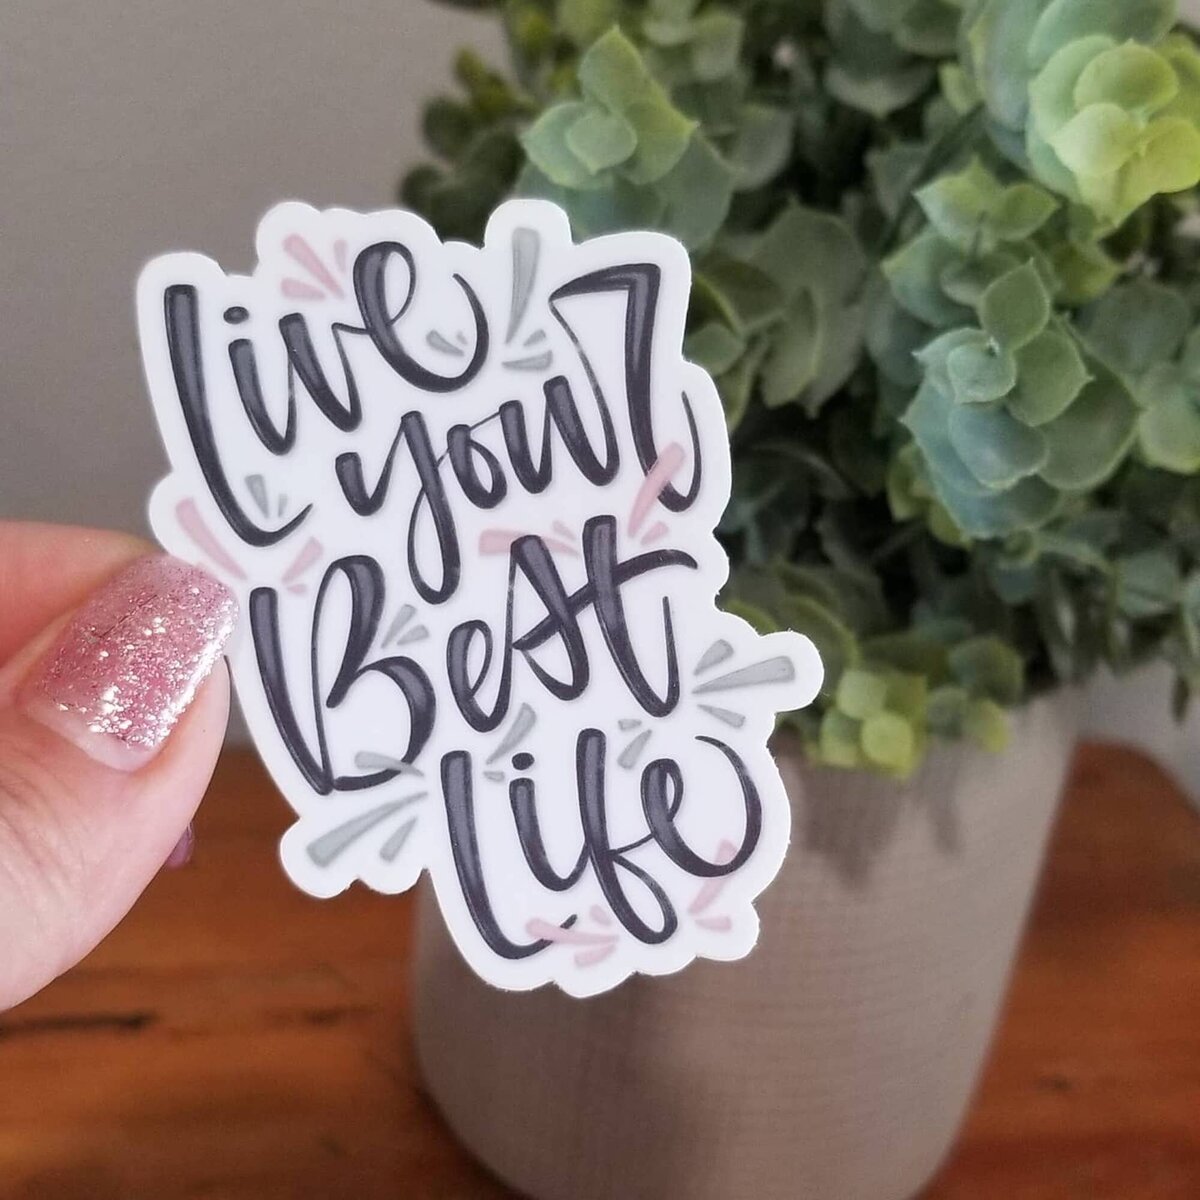 Custom lettered sticker with words "live your best life"